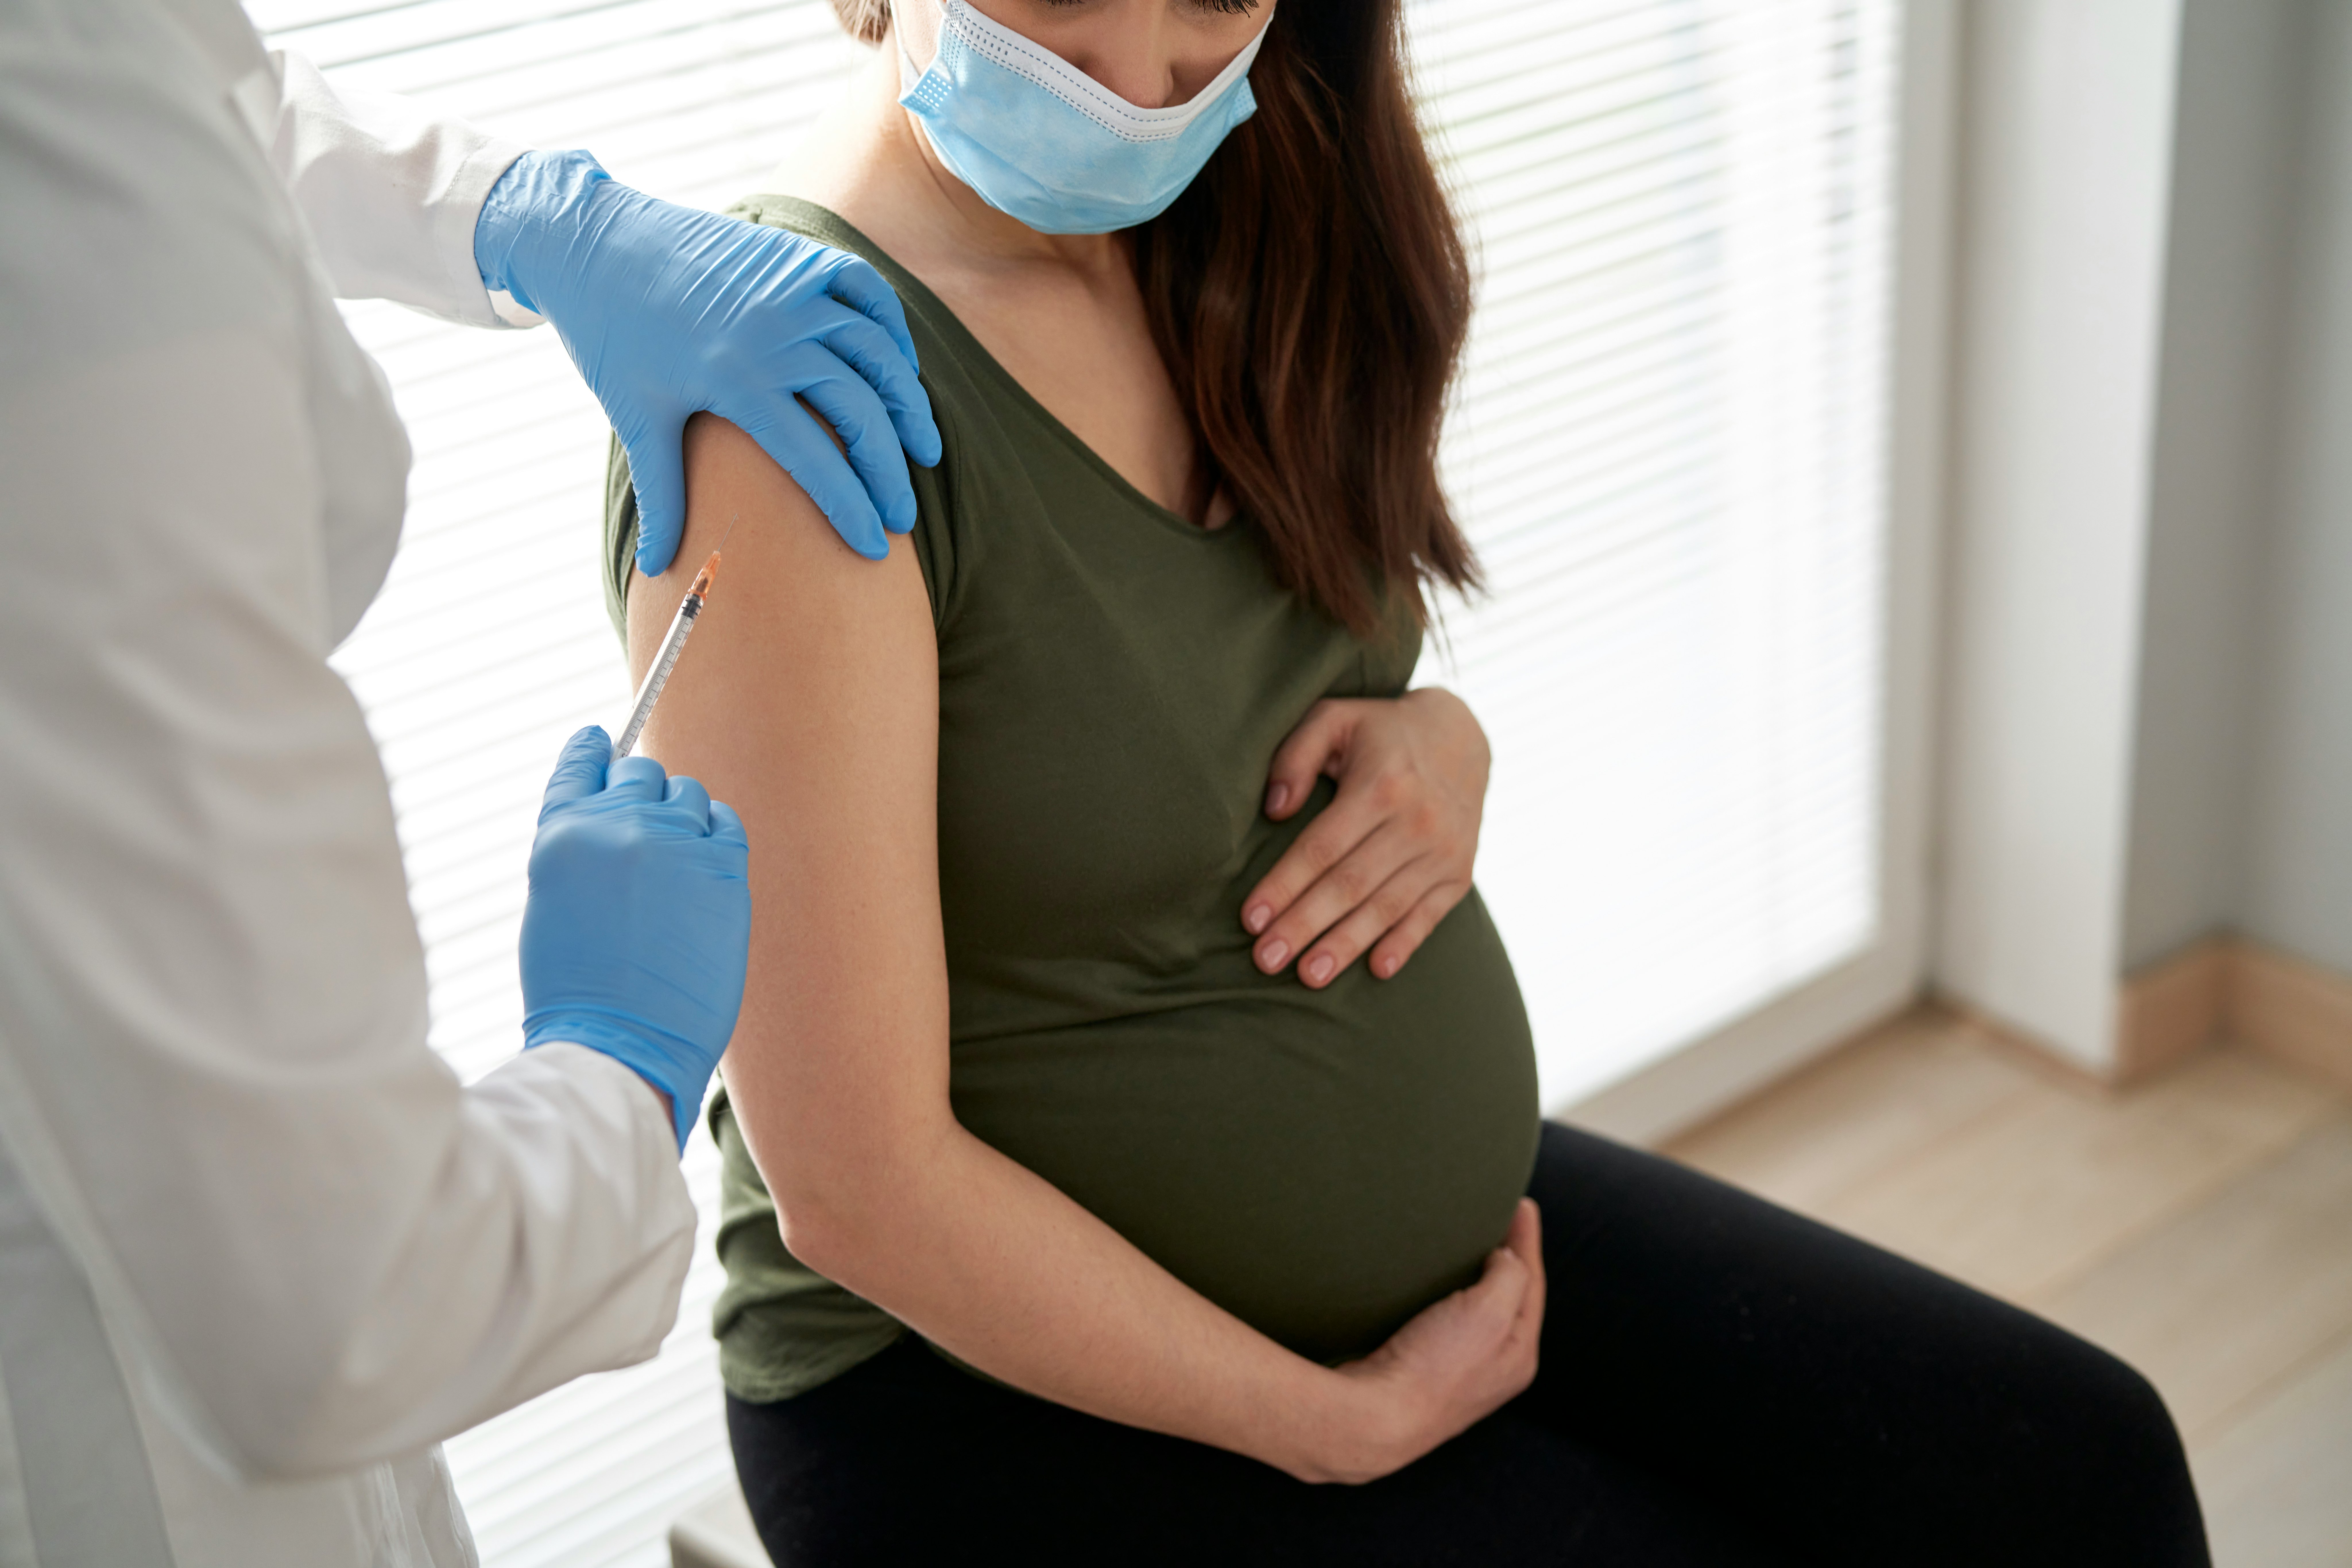 A new study has found that getting vaccinated while pregnant can lend months of continued COVID-19 p...